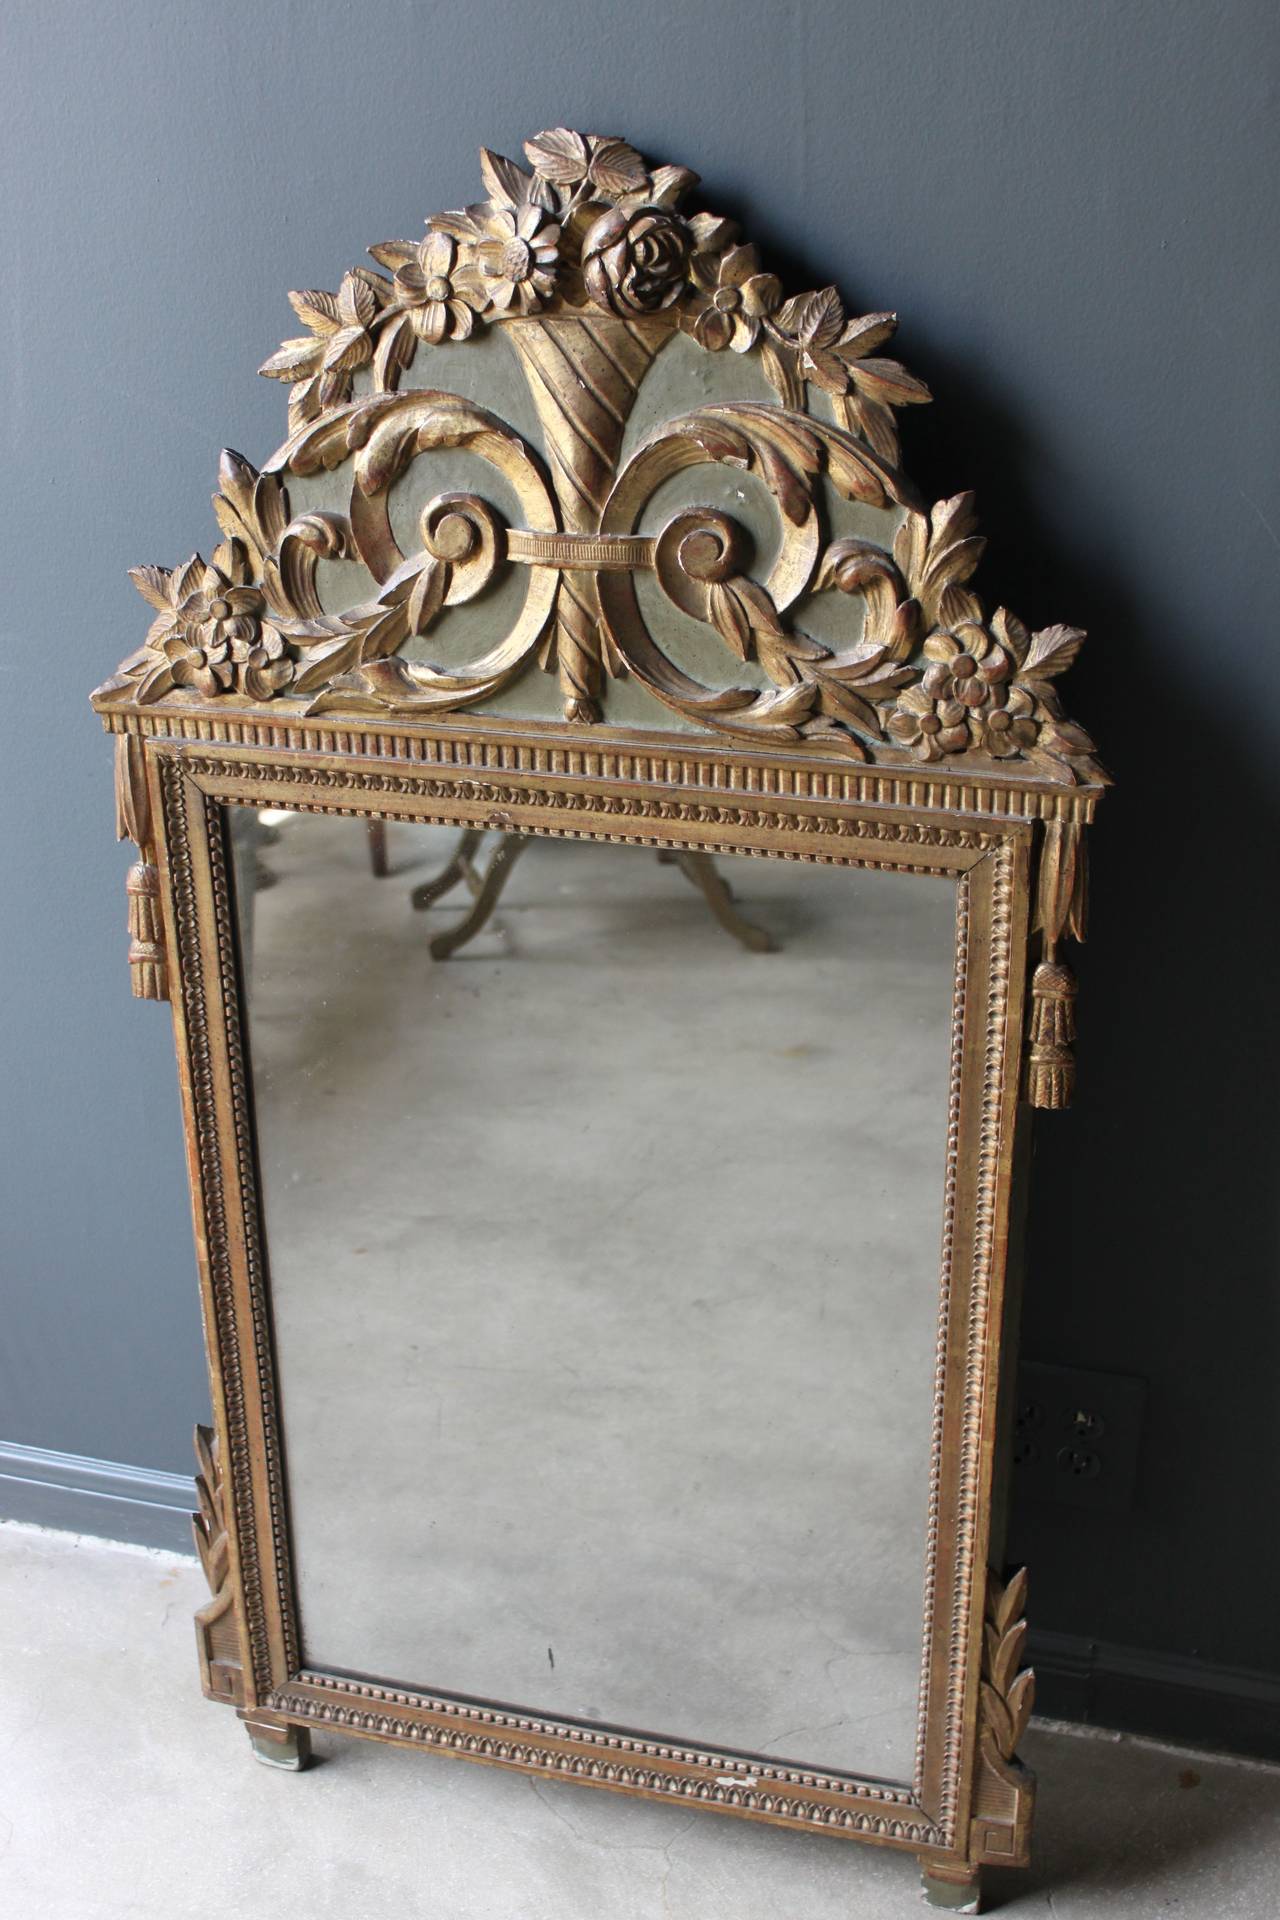 Lovely giltwood mirror in the style of Louis XVI from France in the 19th century. This mirror features lovely hand carving and gilt and painted wood.